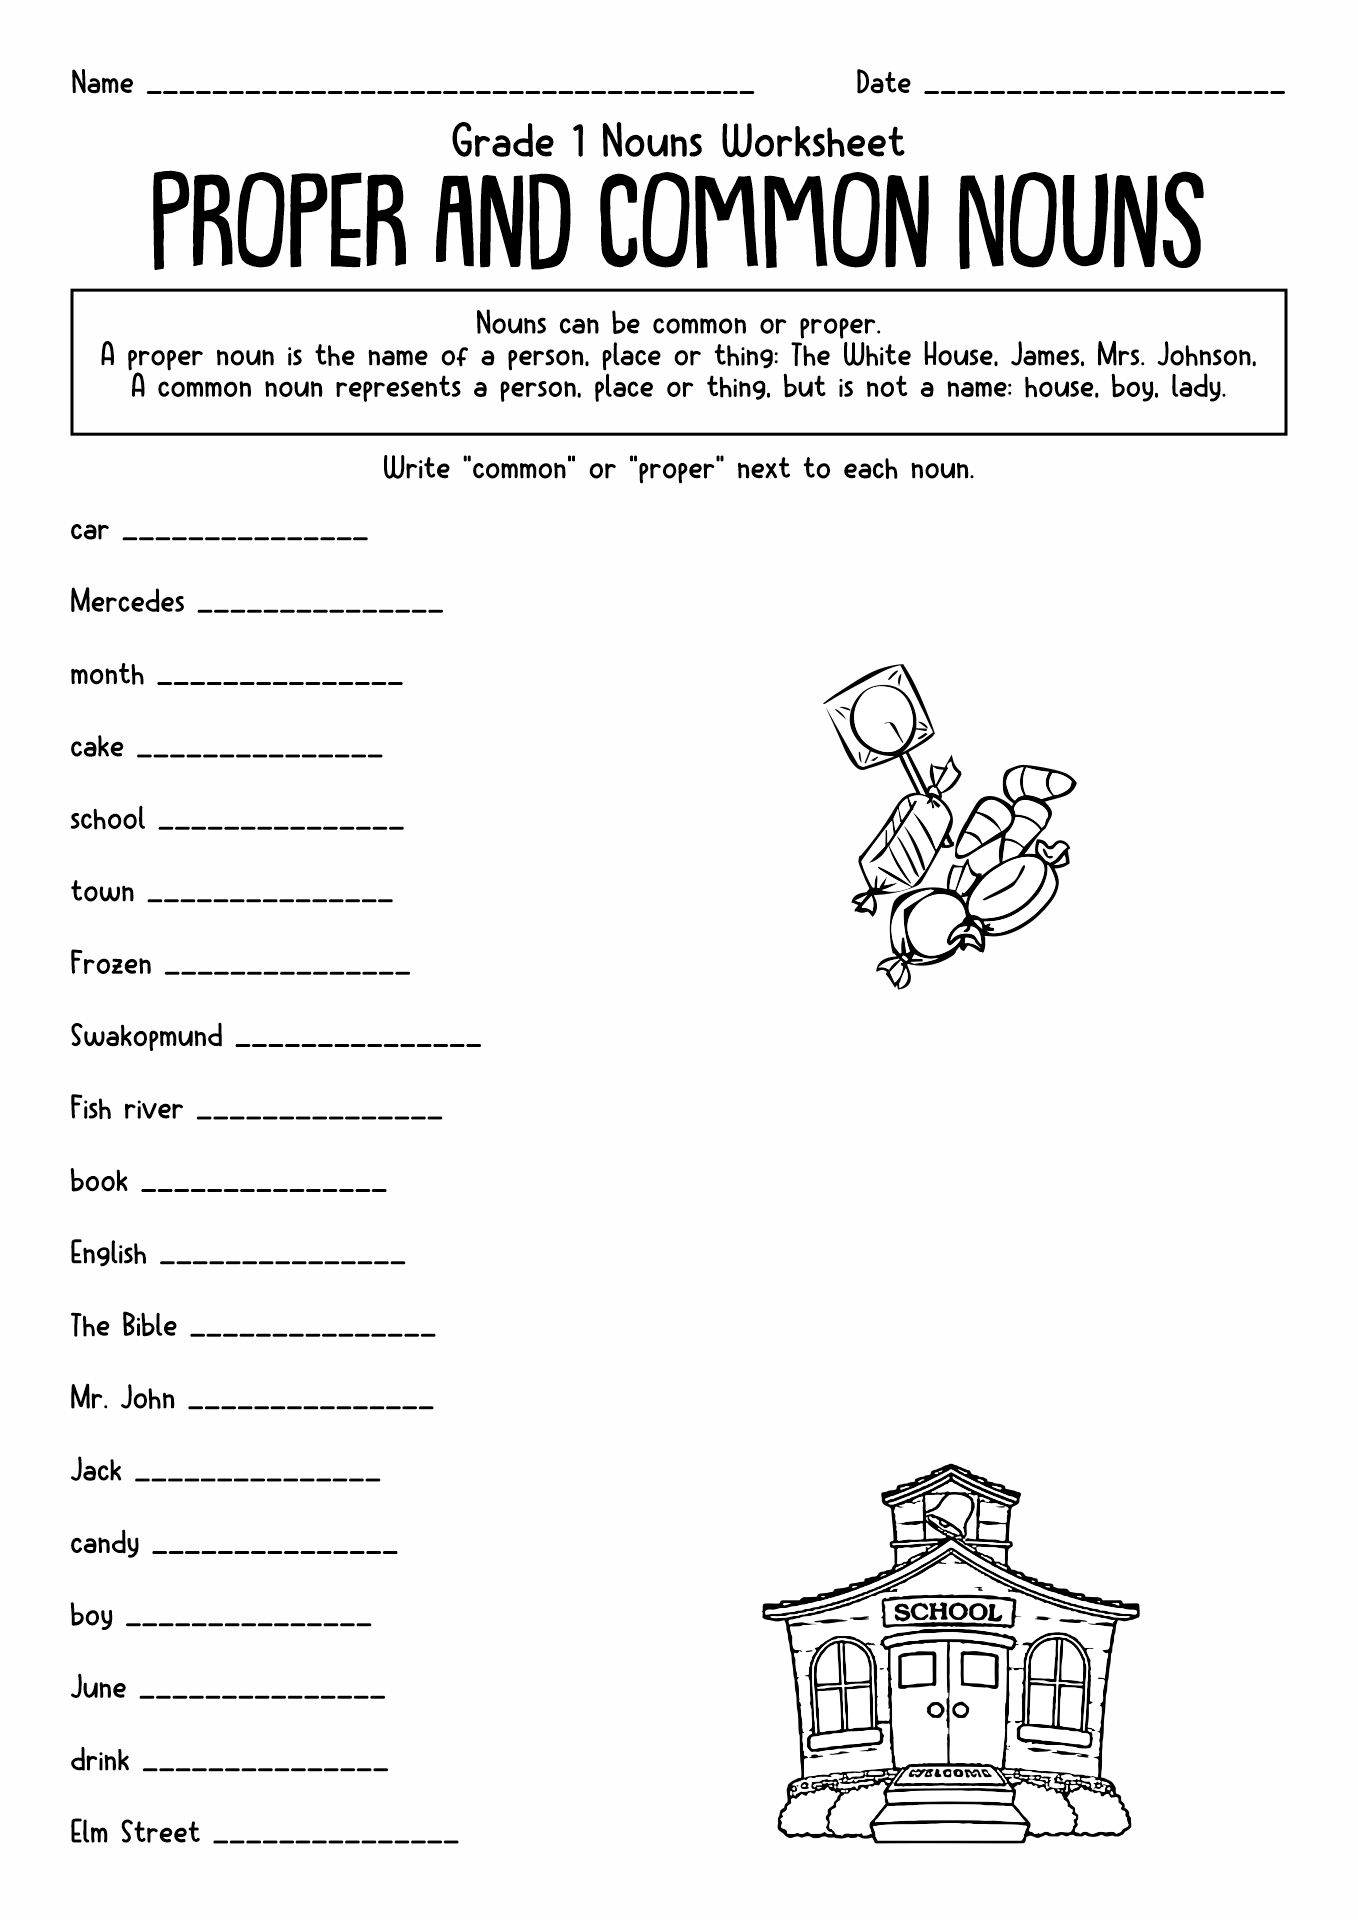 Common and Proper Noun Activities Image